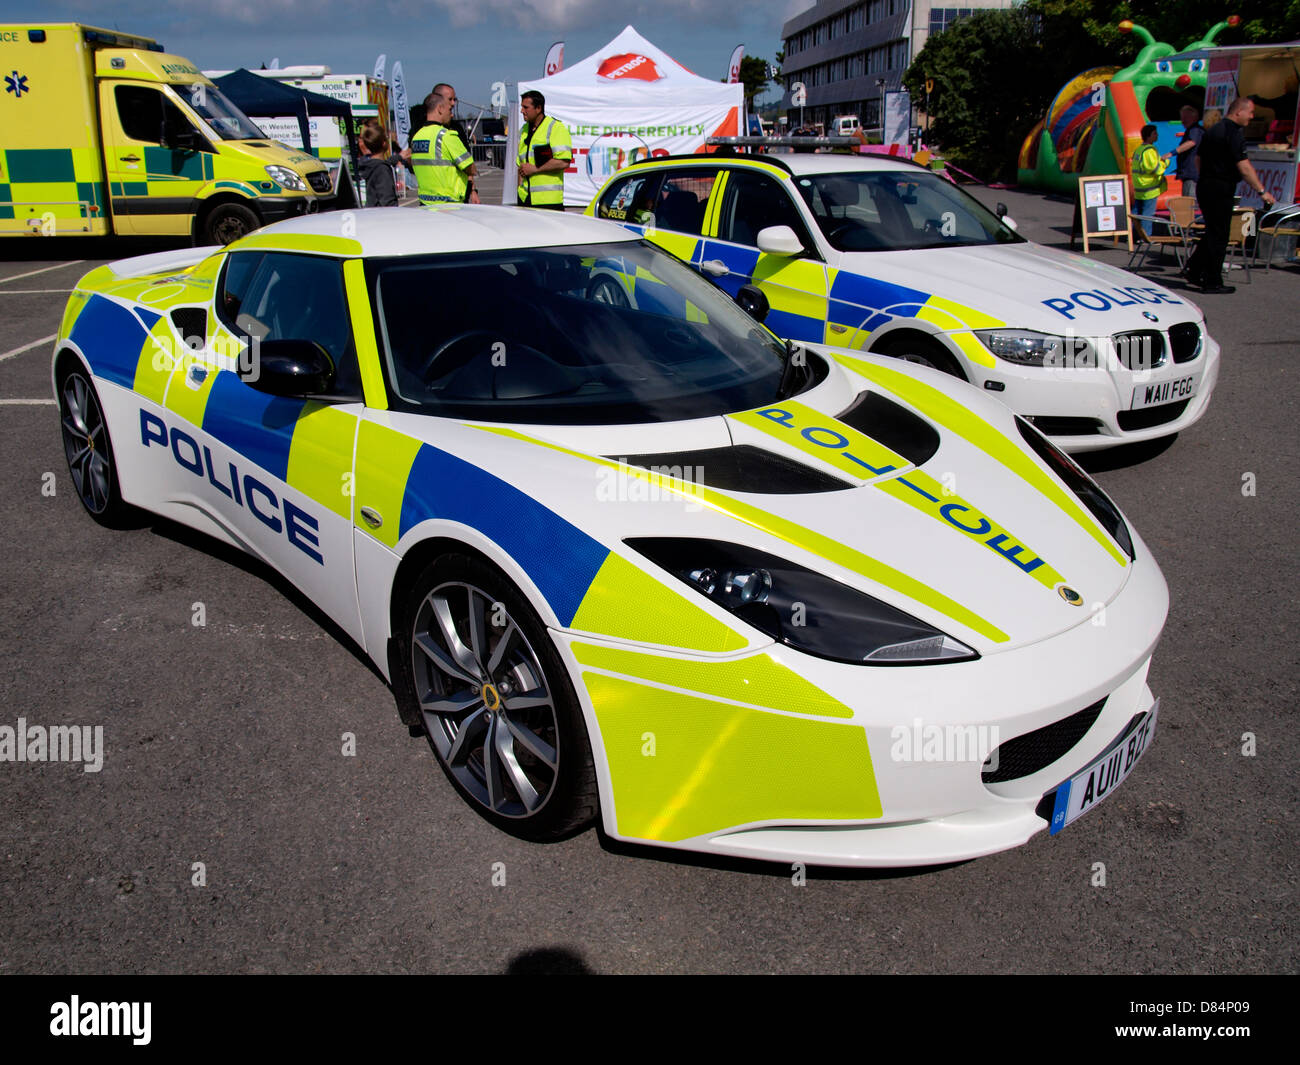 Devon and Cornwall Police Lotus car, It is being used by officers to raise road safety awareness over the summer. Stock Photo